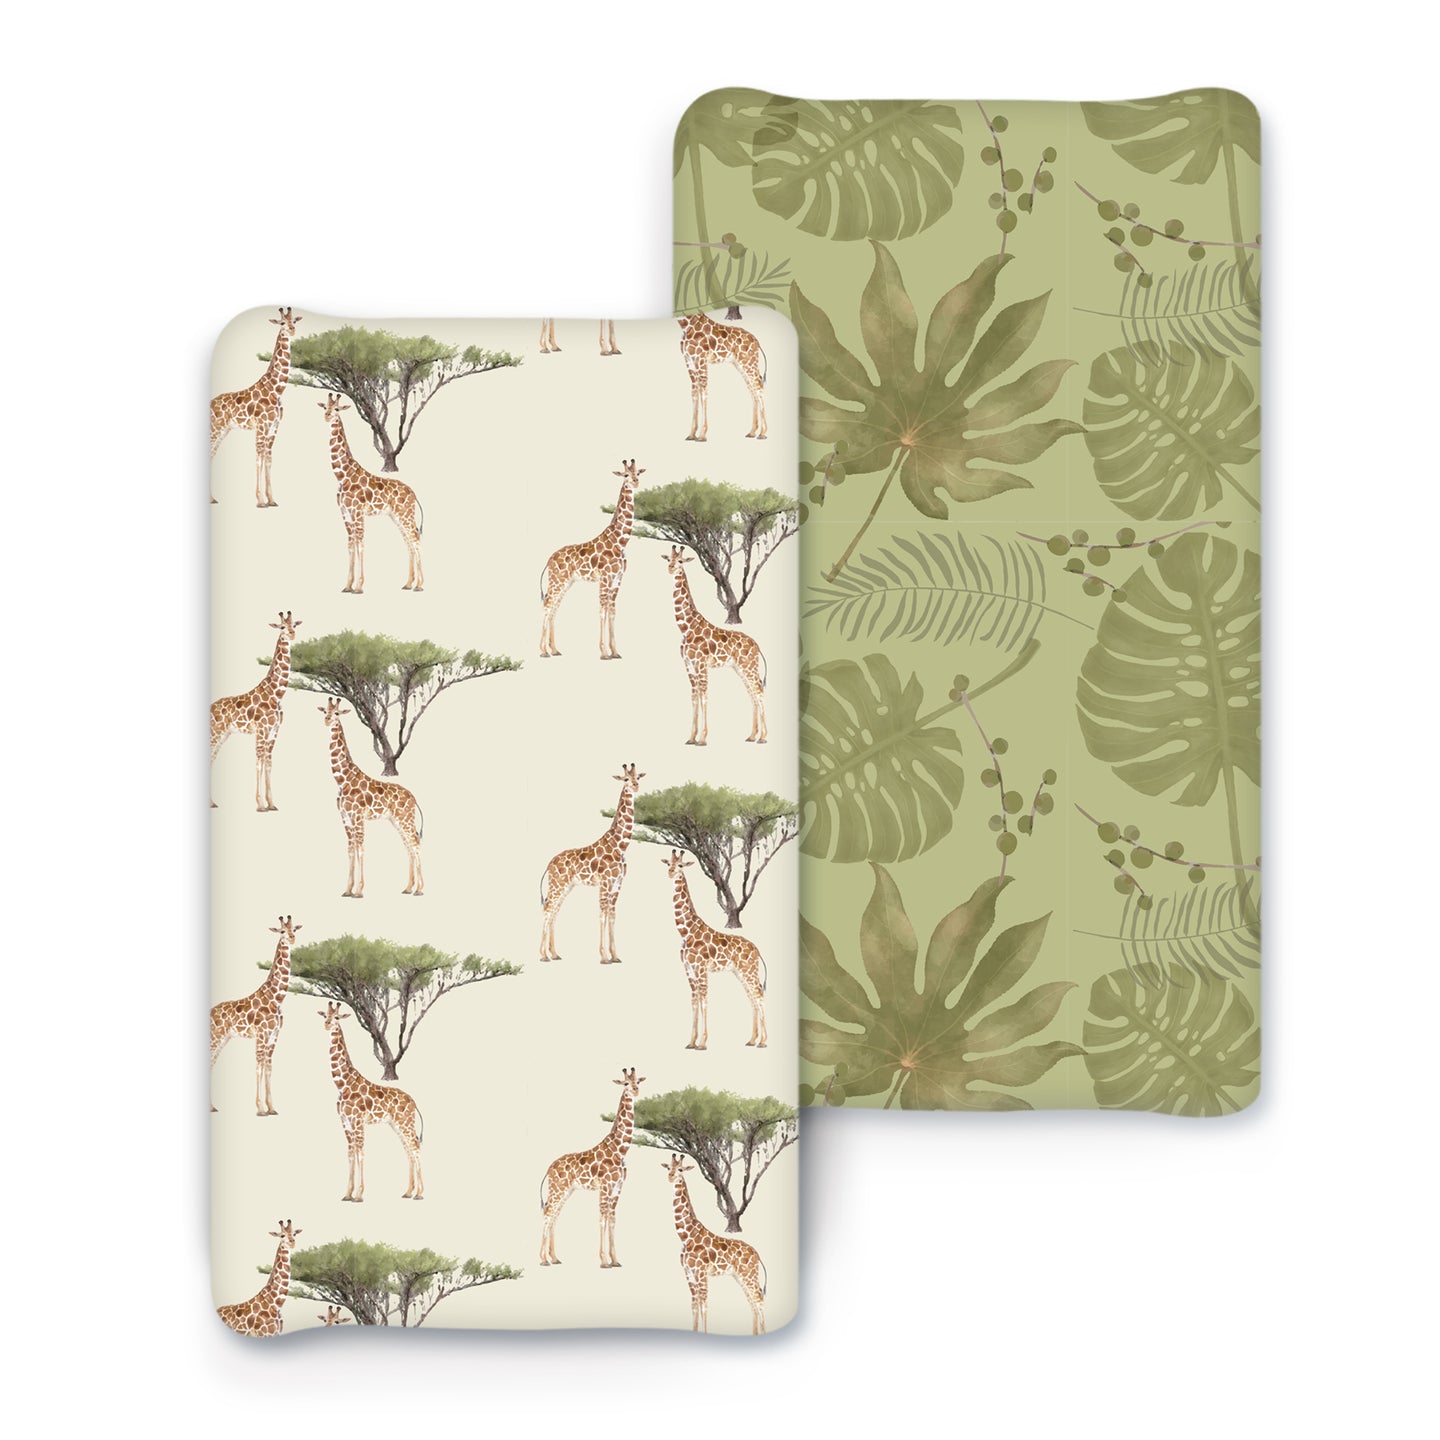 Acrabros Snug Fitted Changing Pad Cover Set Giraffe&Forest